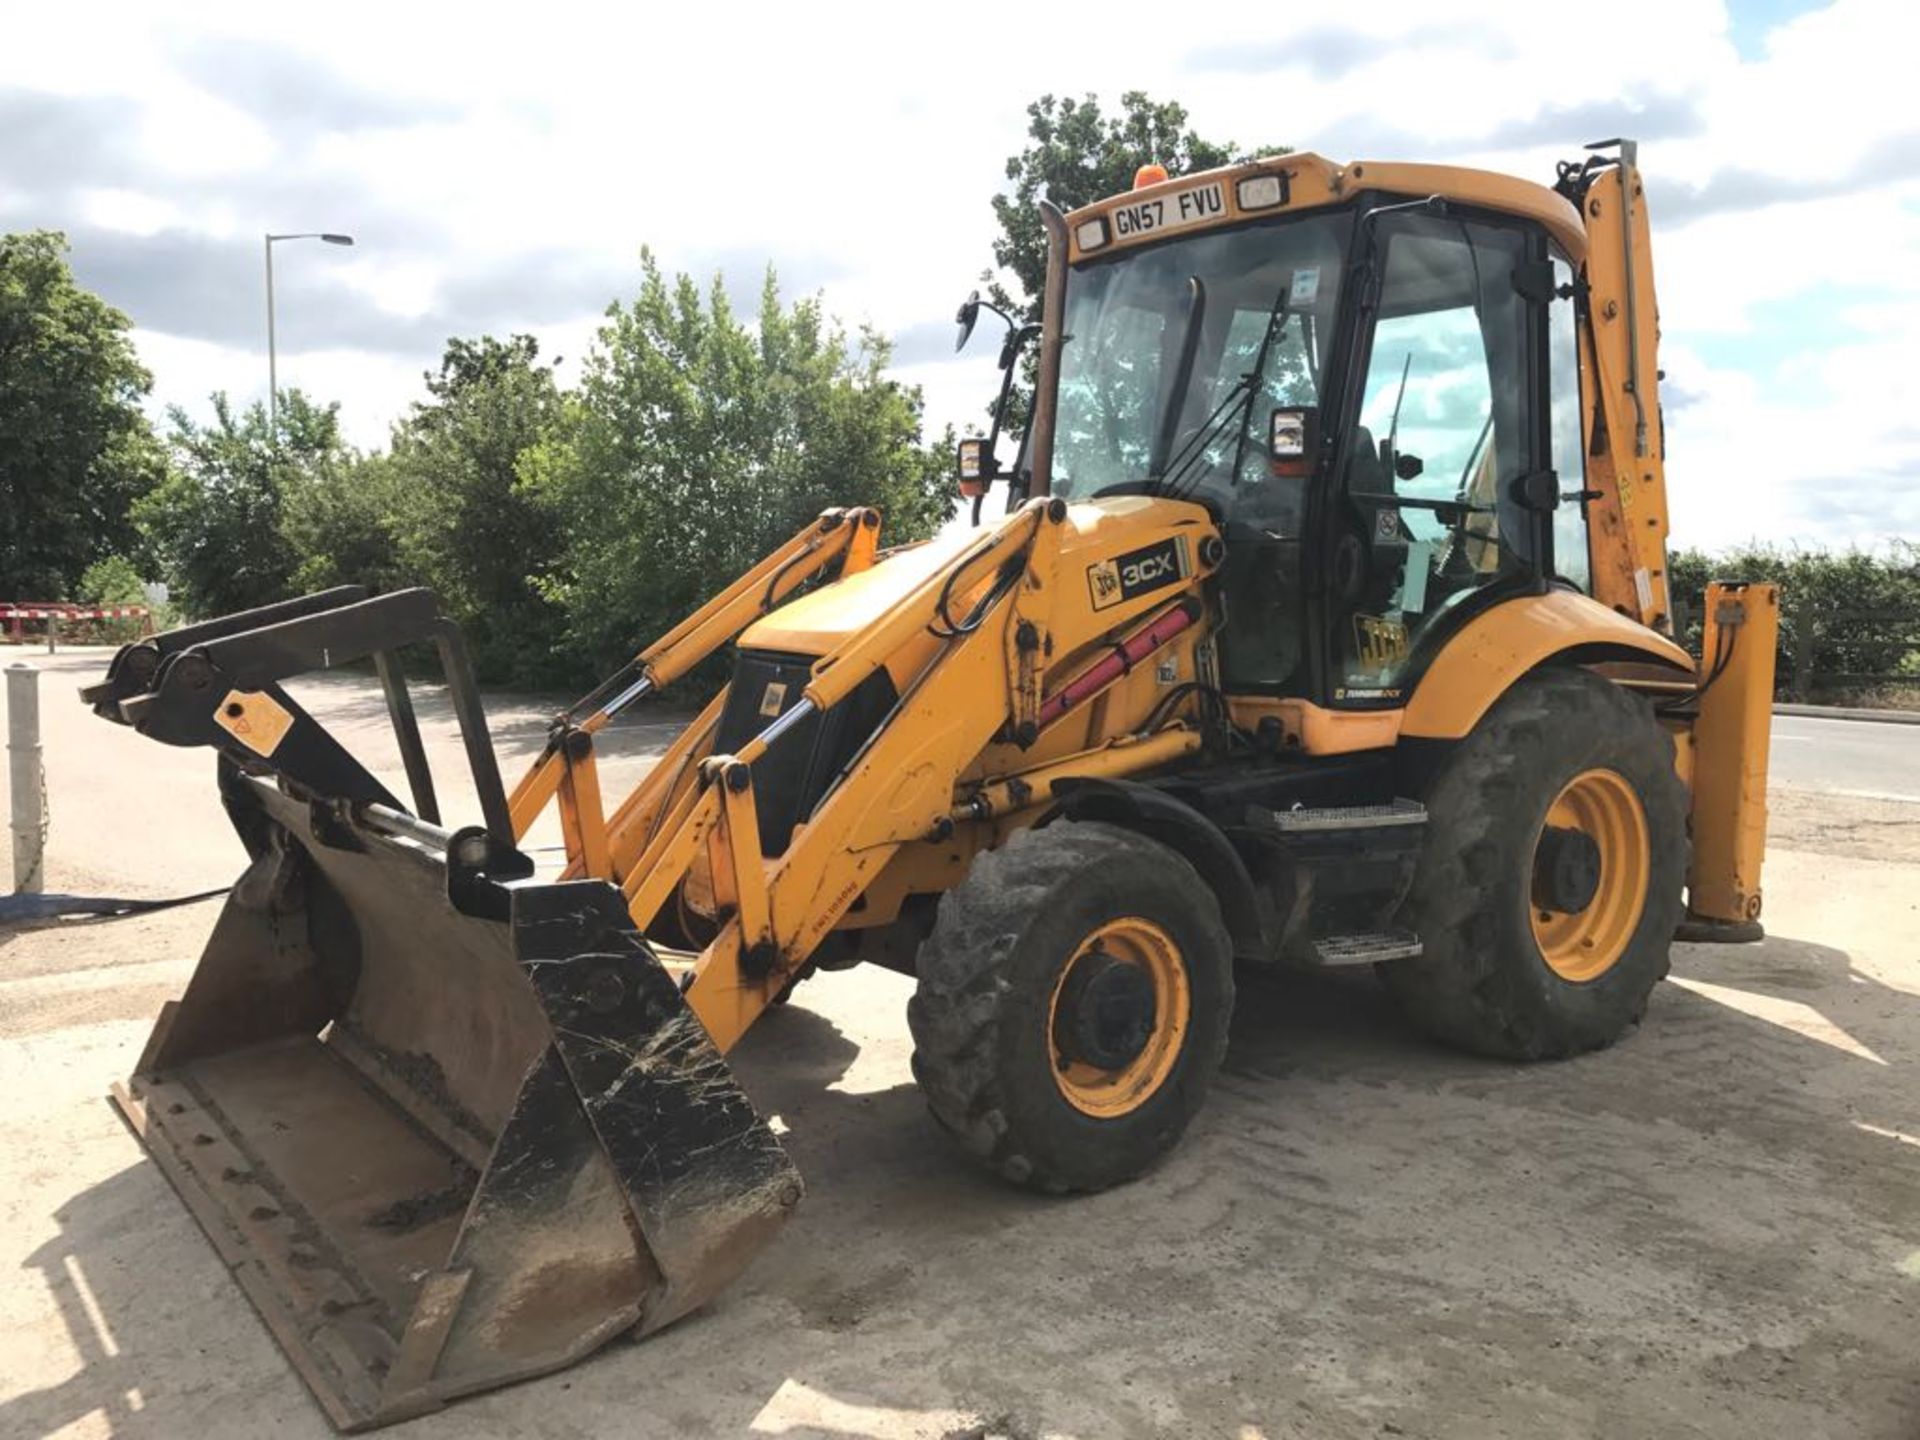 2007 JCB 3CX Digger Loader c/w extending diiper arm, piped, 4 in 1 bucket, turbo Power Shift, torque